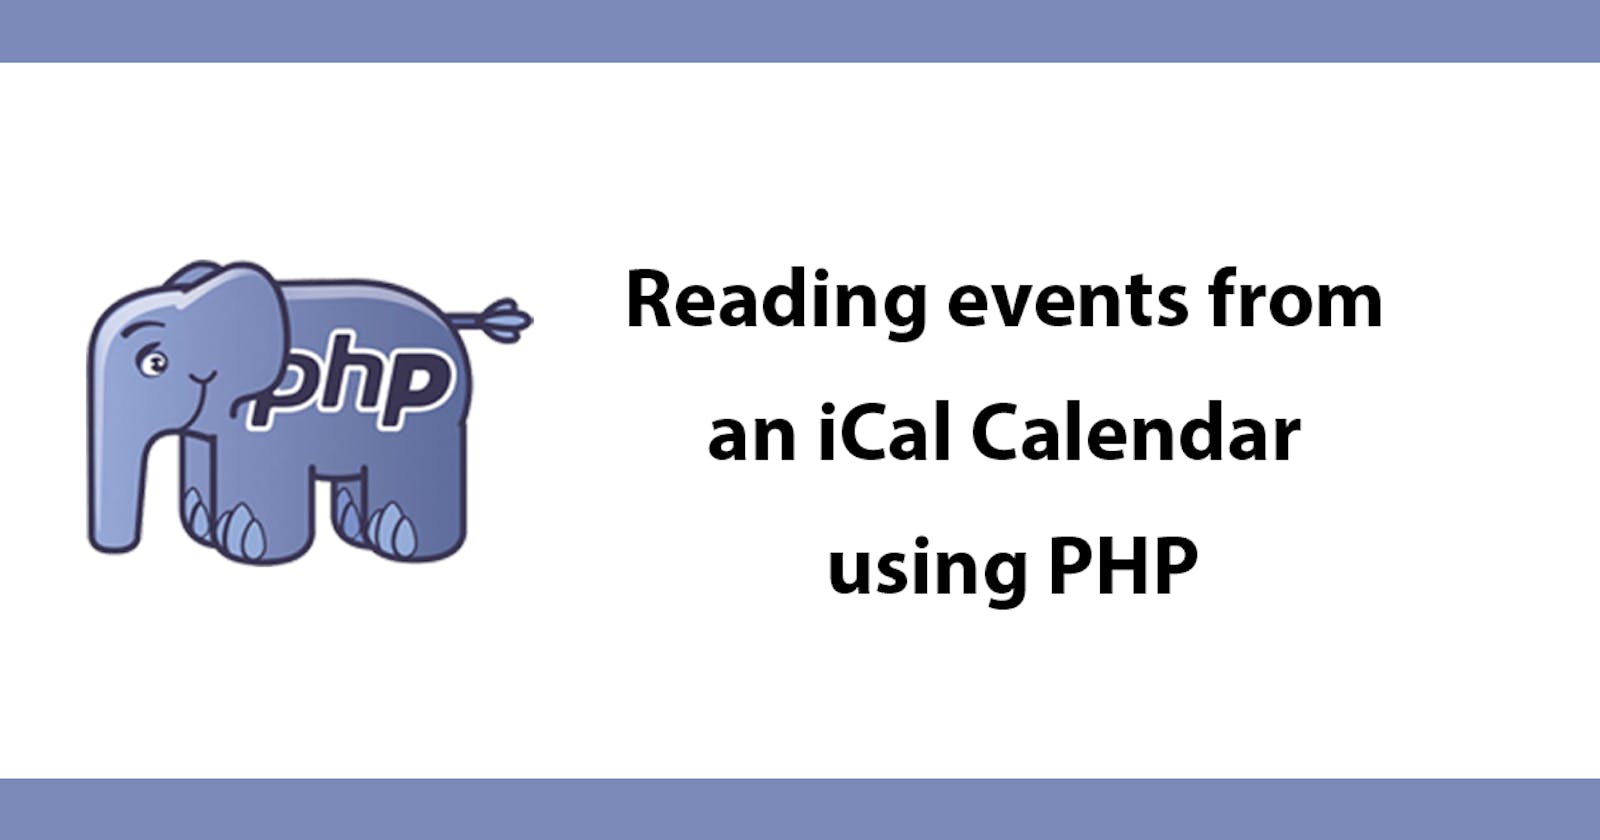 Reading events from an iCal Calendar using PHP